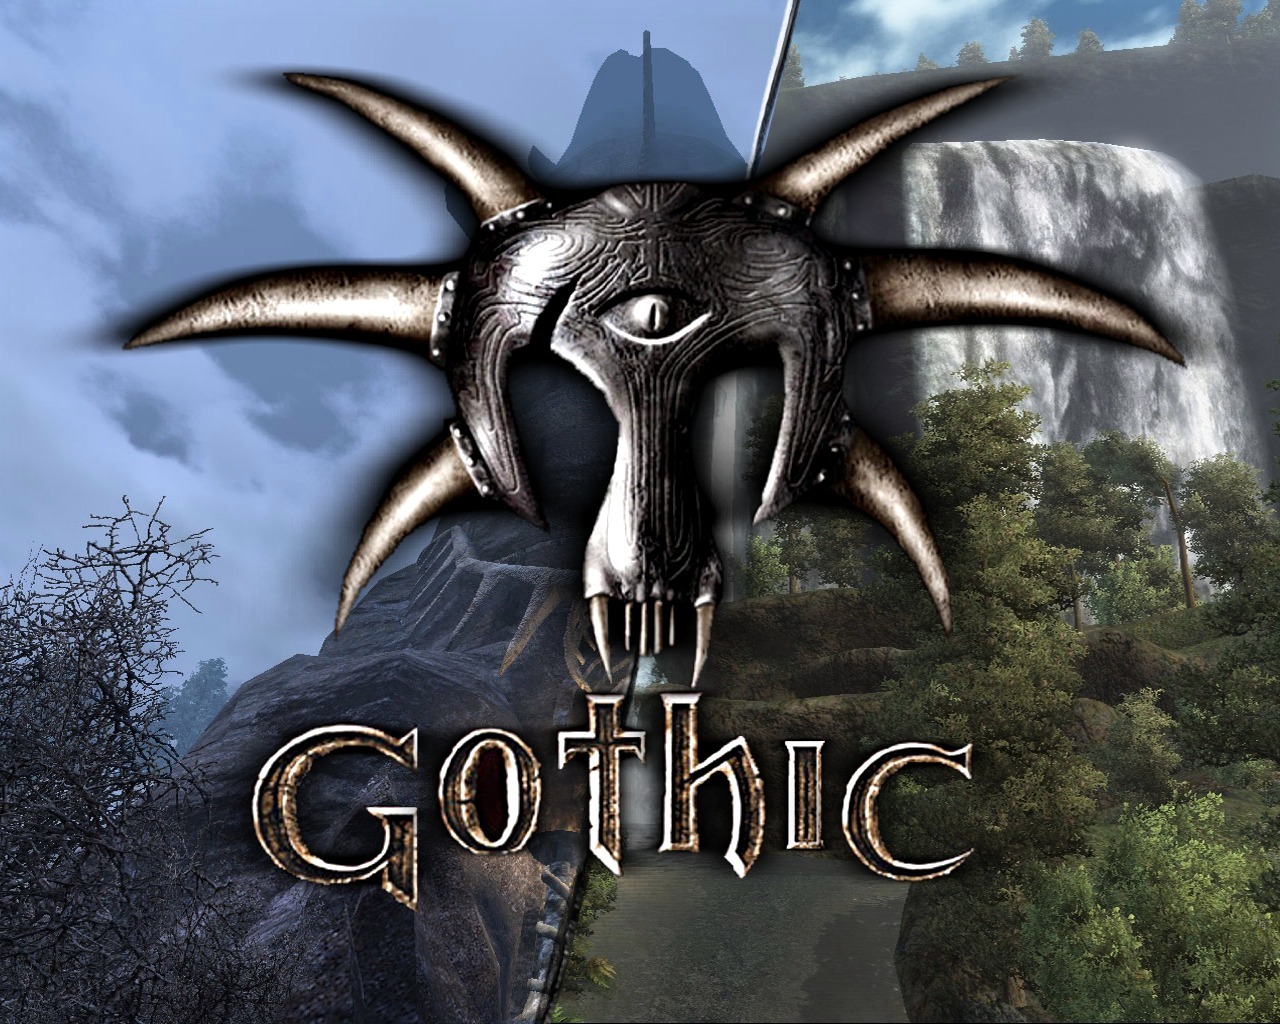 Desktop Wallpapers Gothic vdeo game